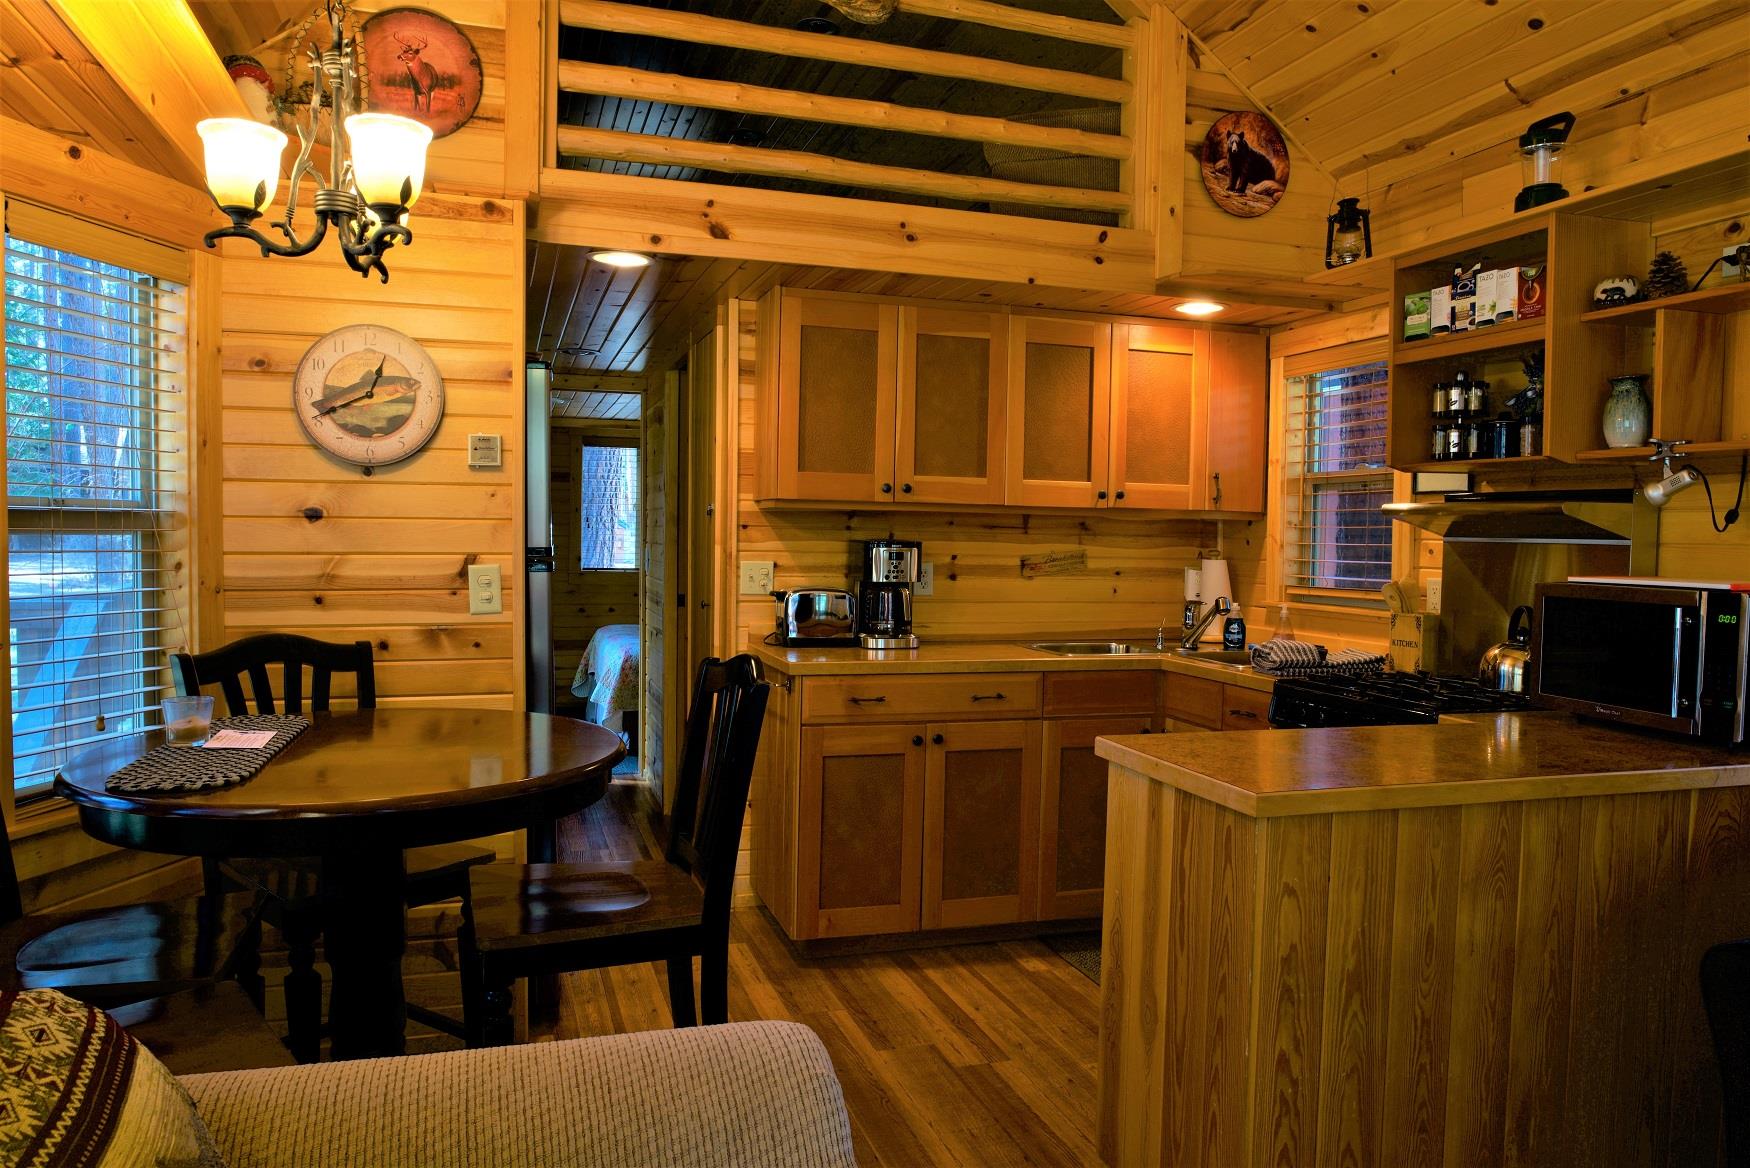 Cook up a delicious family dinner in the kitchen of Ponderosa Cabin at Cold Springs Resort & RV Park in Camp Sherman, Oregon